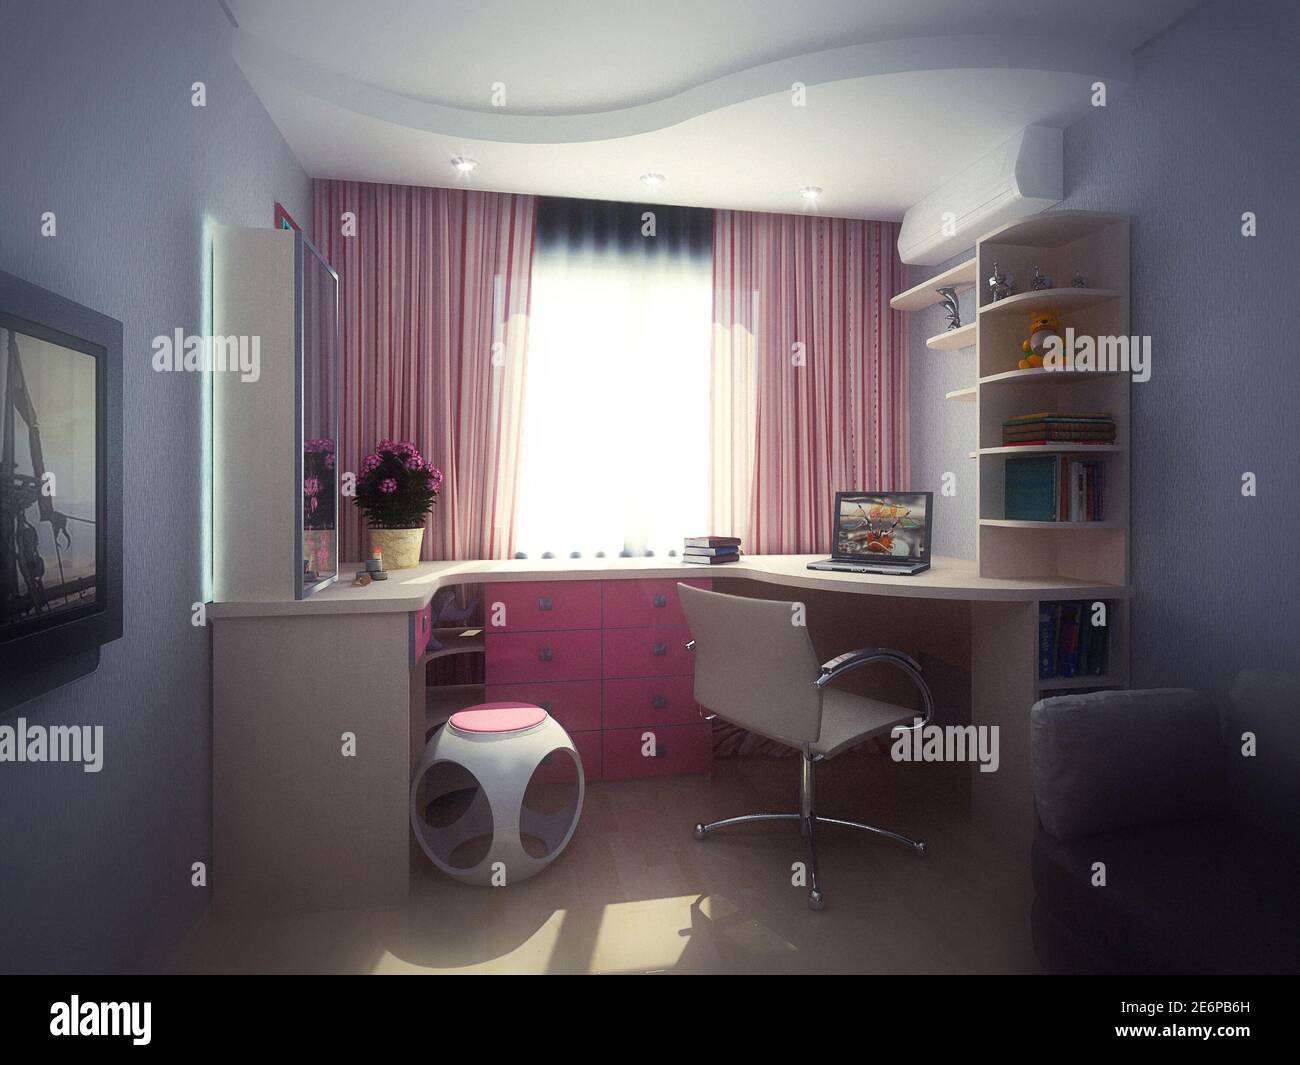 3d illustration concept of interior design of a children's bedroom for a girl Stock Photo